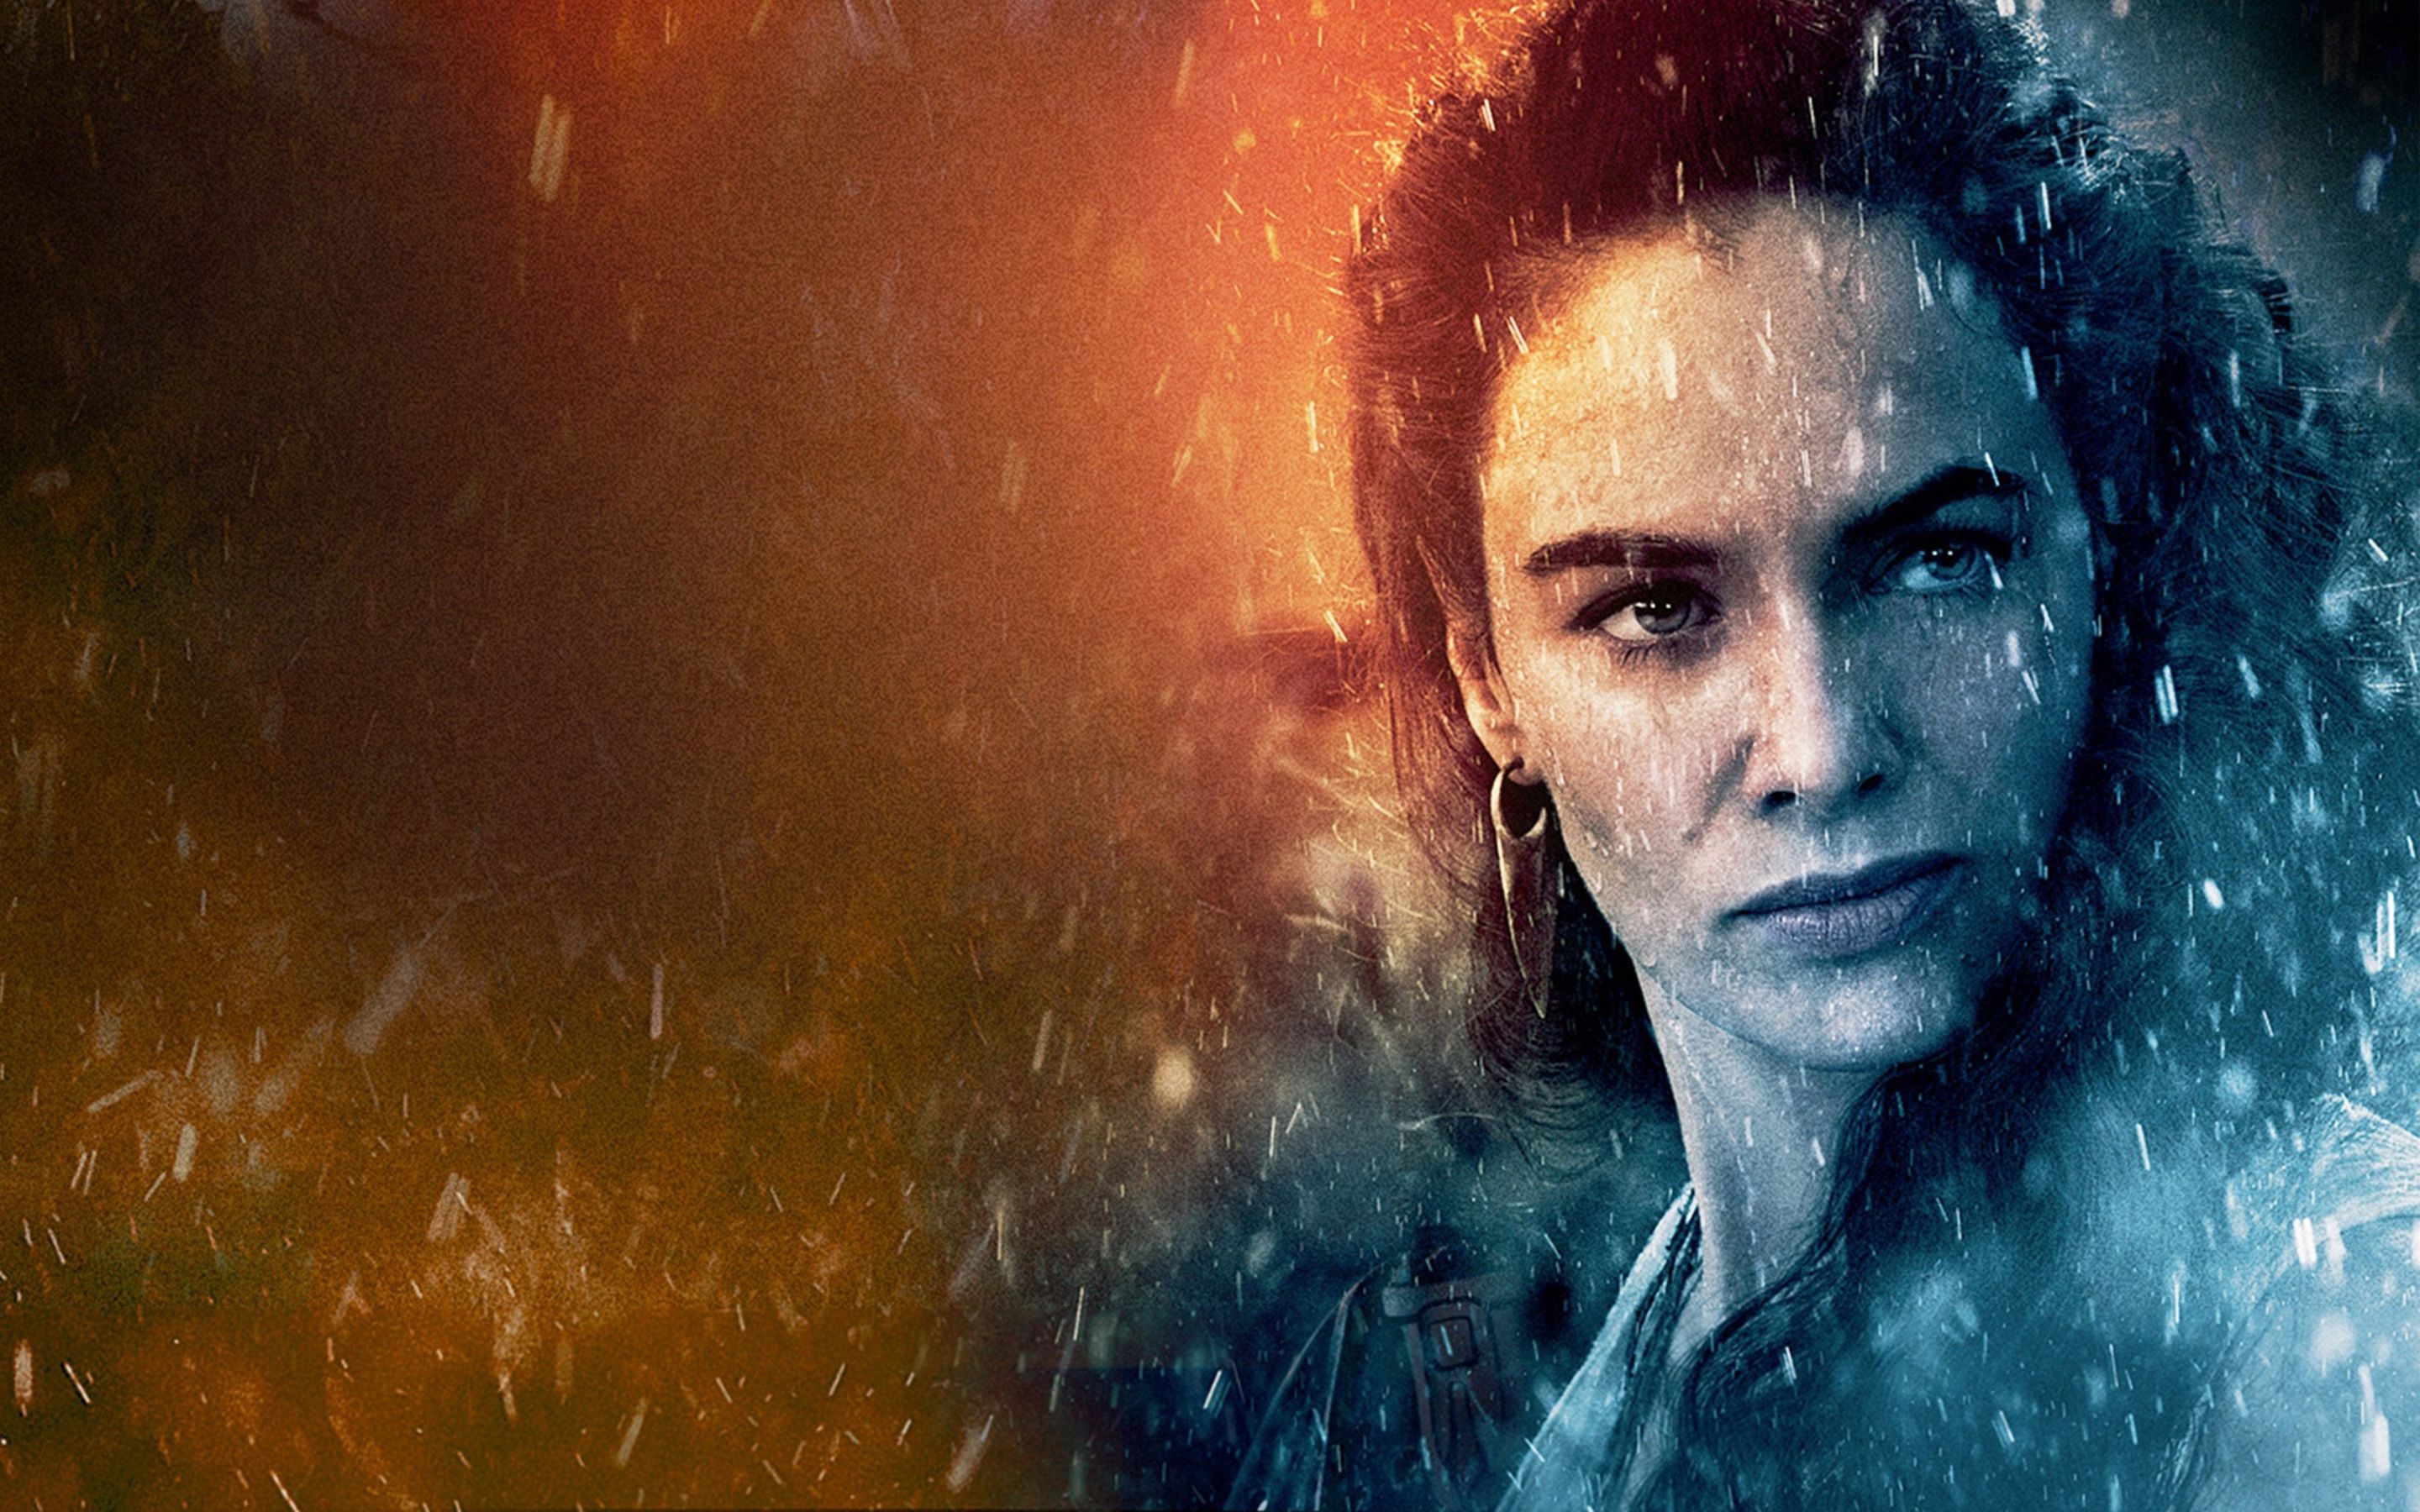 Lena Headey 300 Rise of an Empire Wallpapers | HD Wallpapers